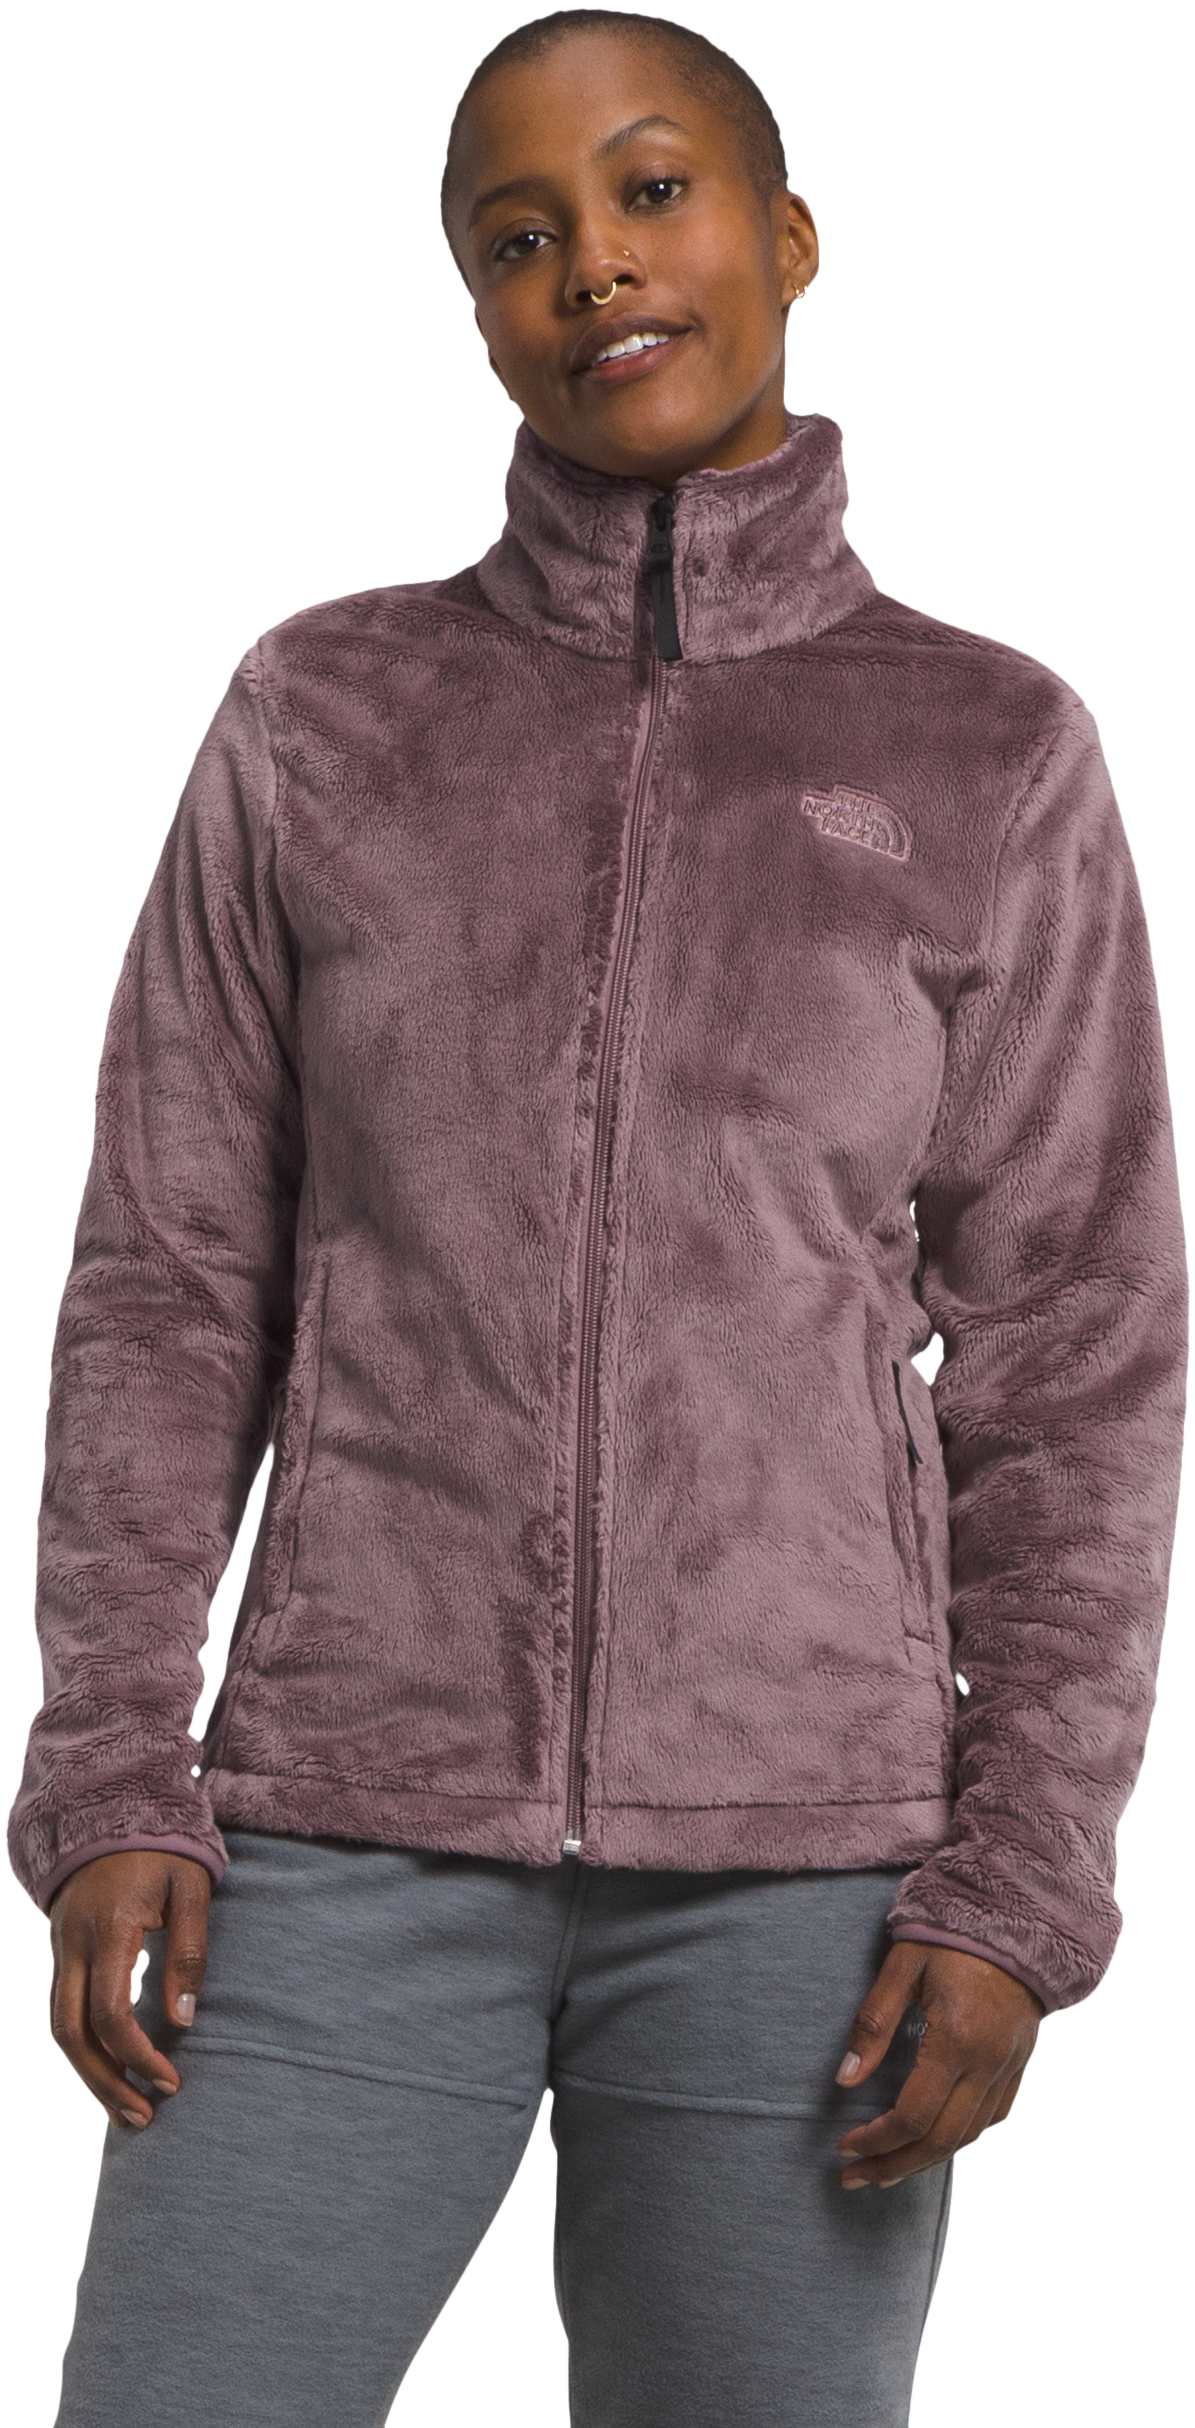 The North Face Osito Jacket for Ladies - Fawn Grey - S